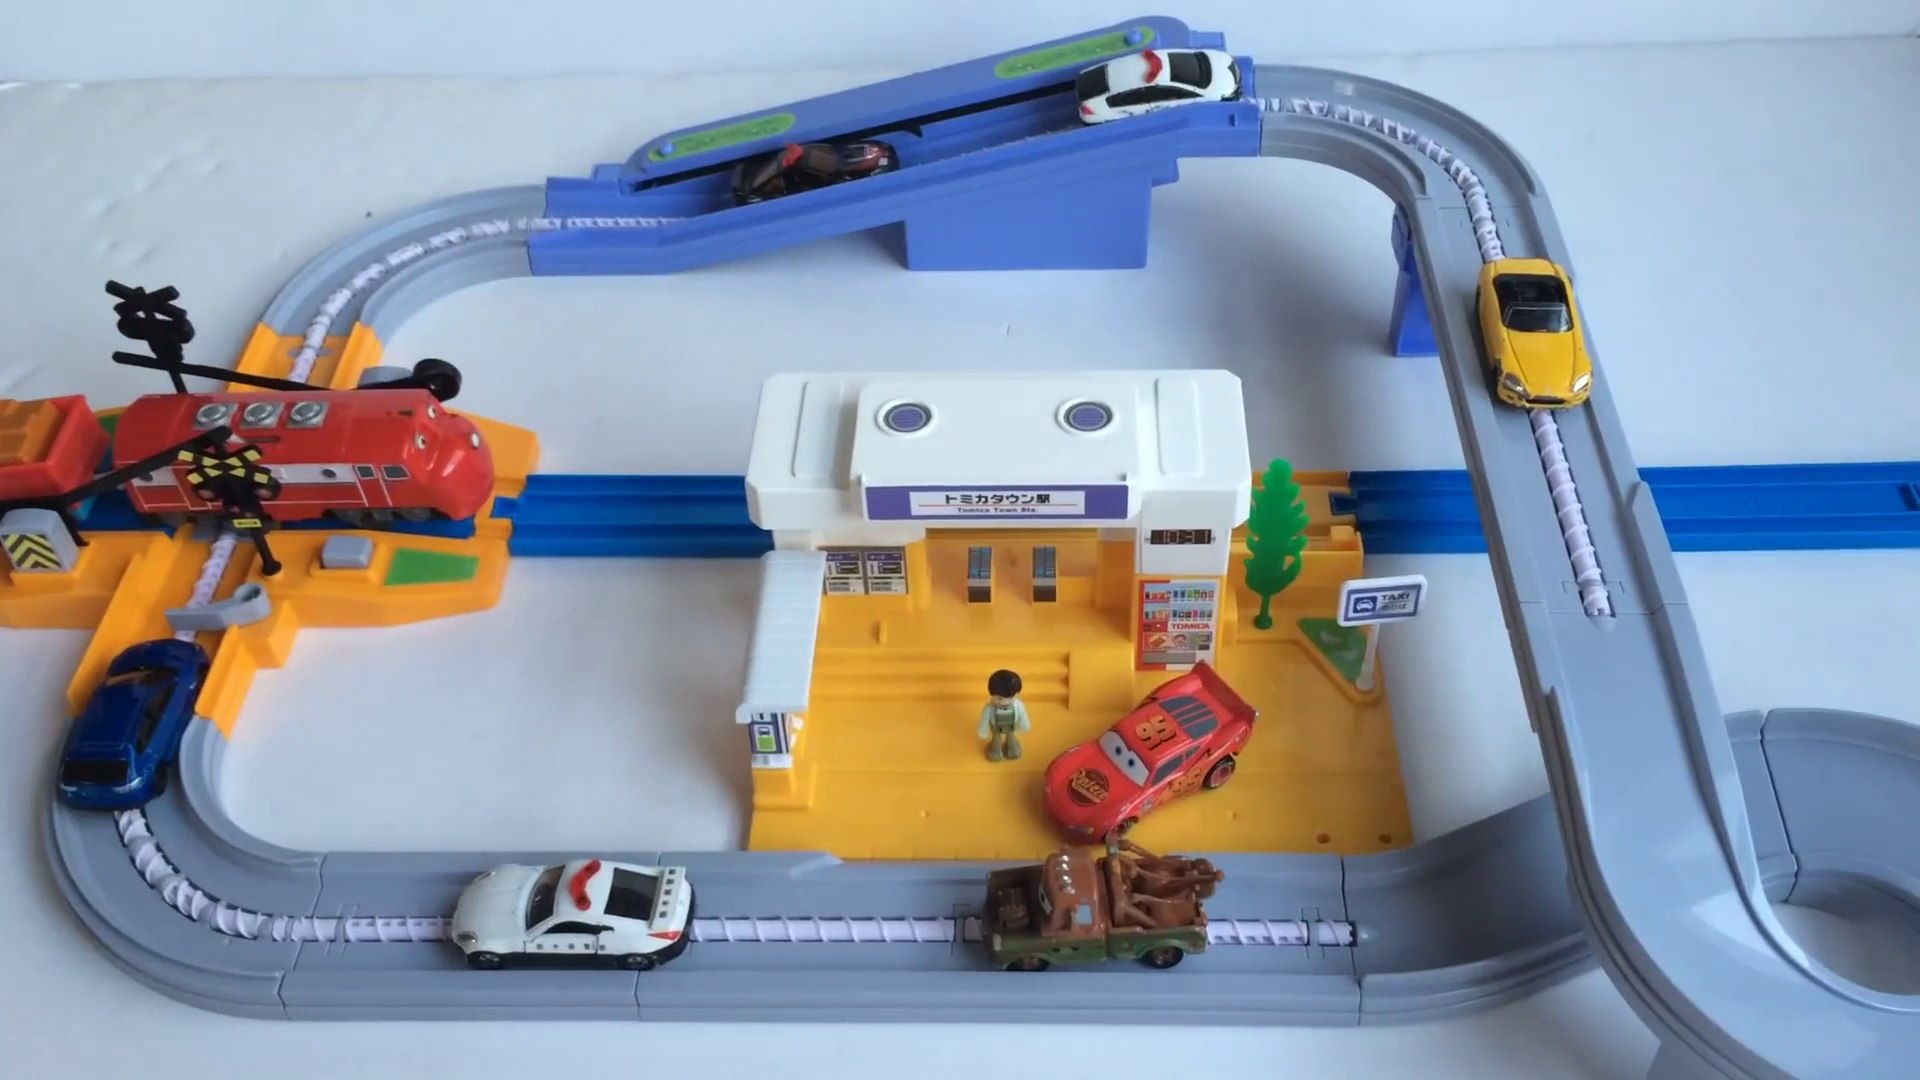 Takara Tomy Pla-rail Let's play with Tomica Railroad Crossing Set EMS Tracking 